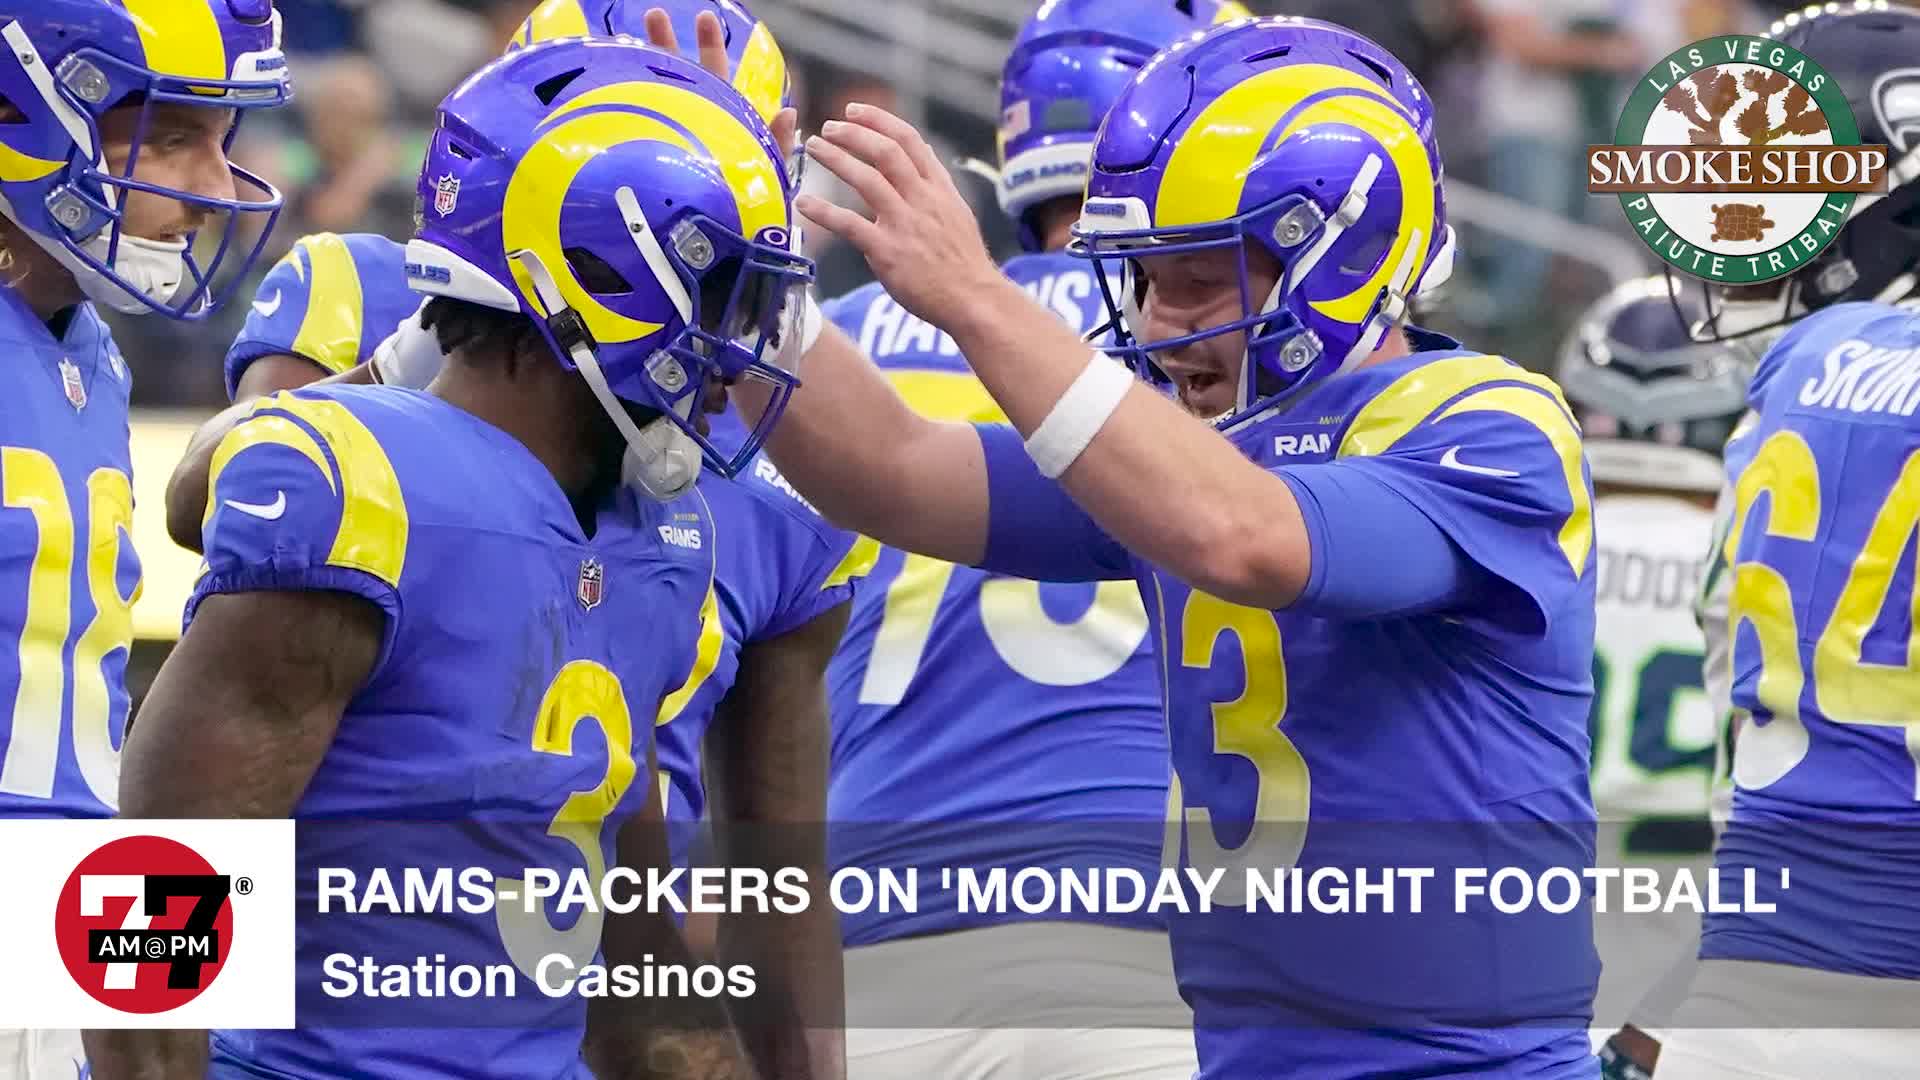 Monday Night Football odds for Rams vs Packers